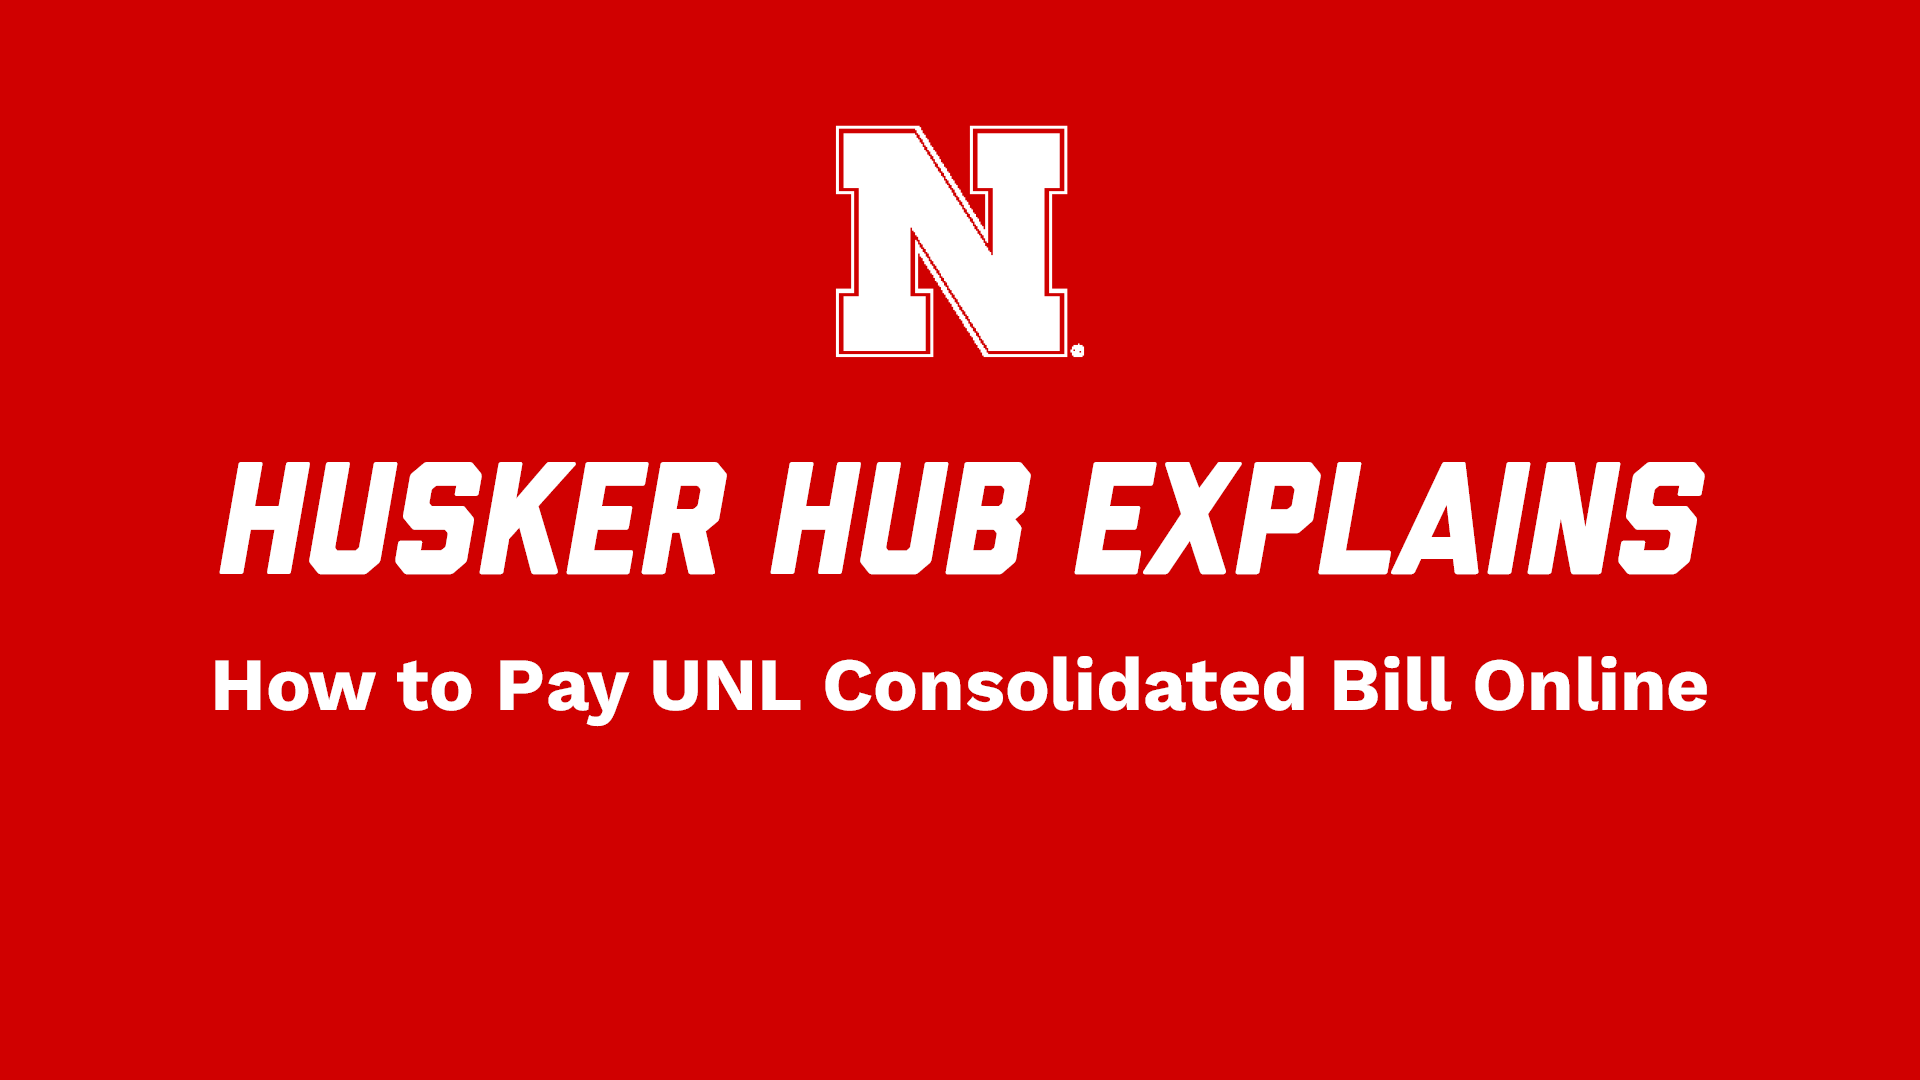 Husker Hub Explains: How to Pay UNL Consolidated Bill Online